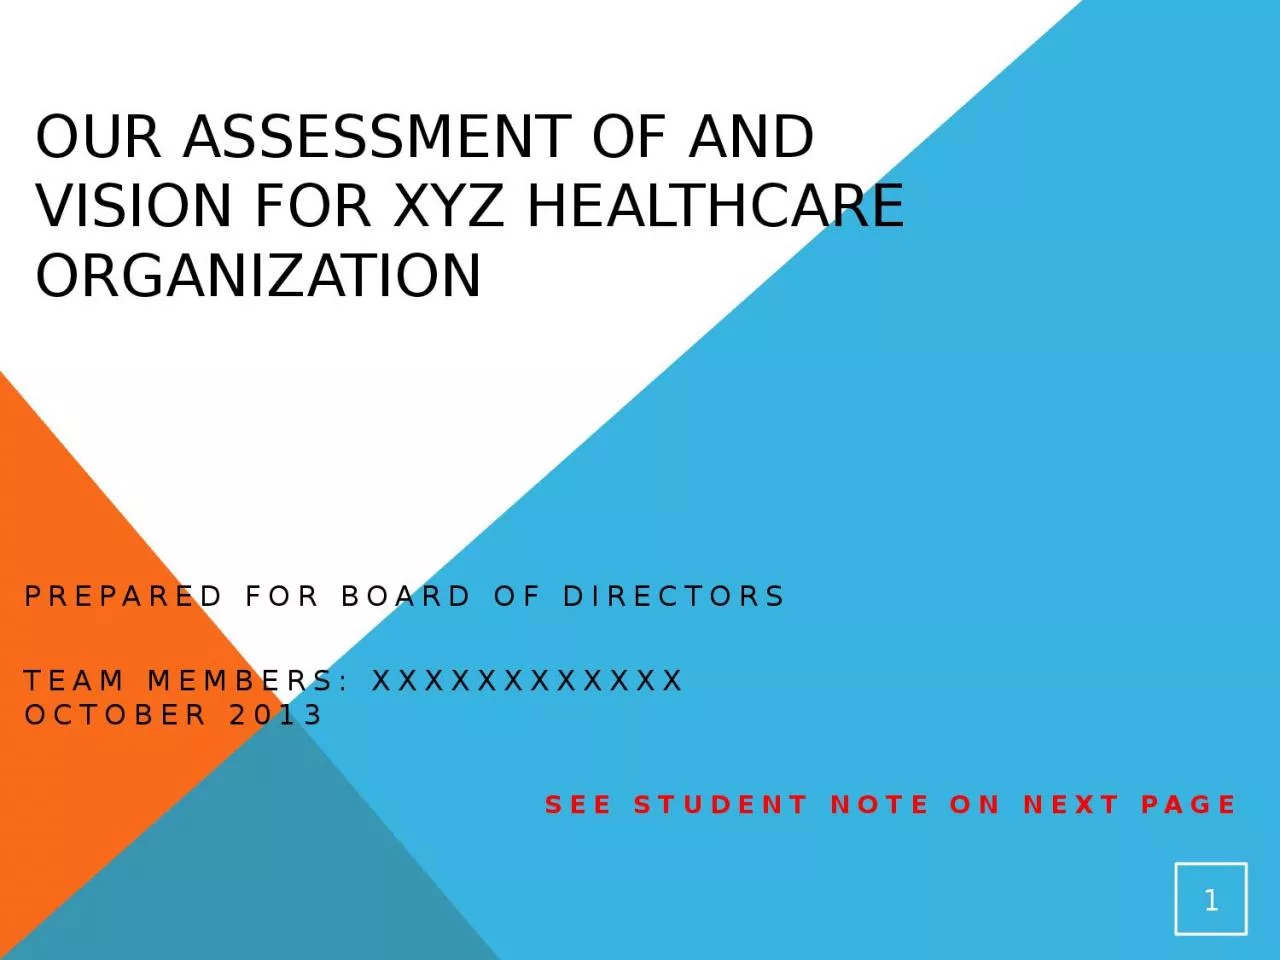 Our assessment of and vision for XYZ healthcare organization